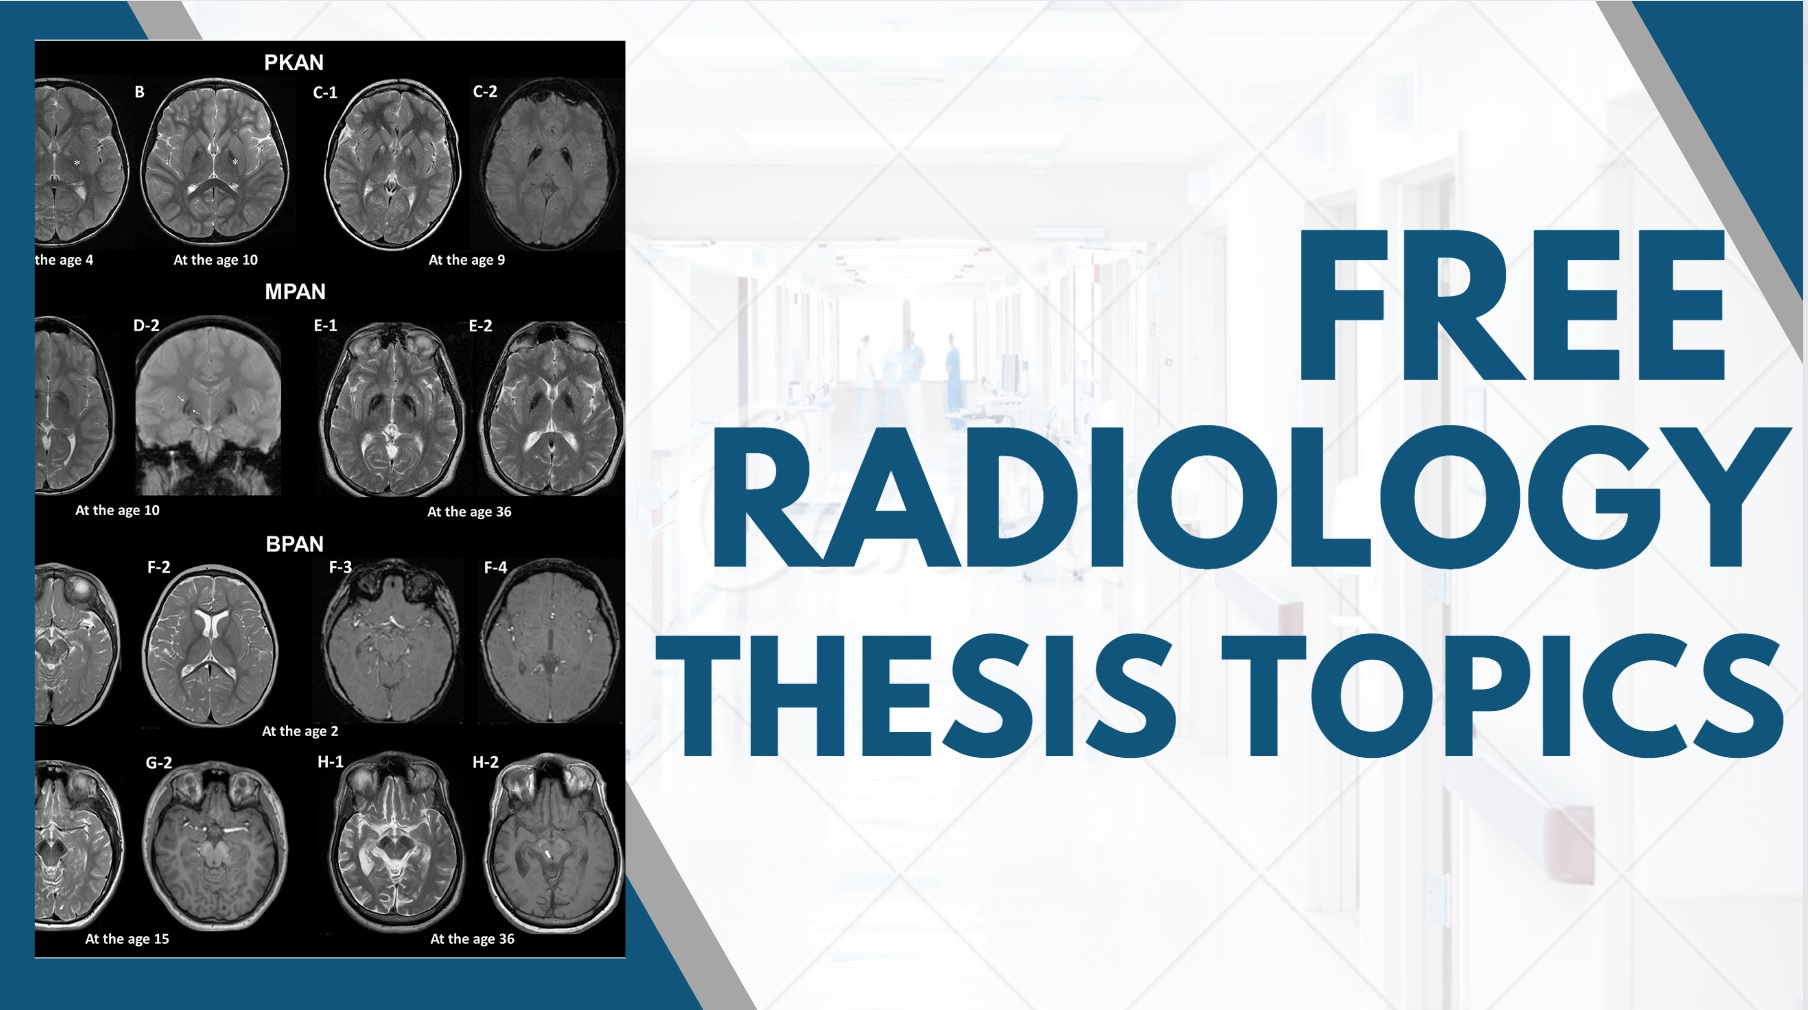 recent thesis topics in radiology